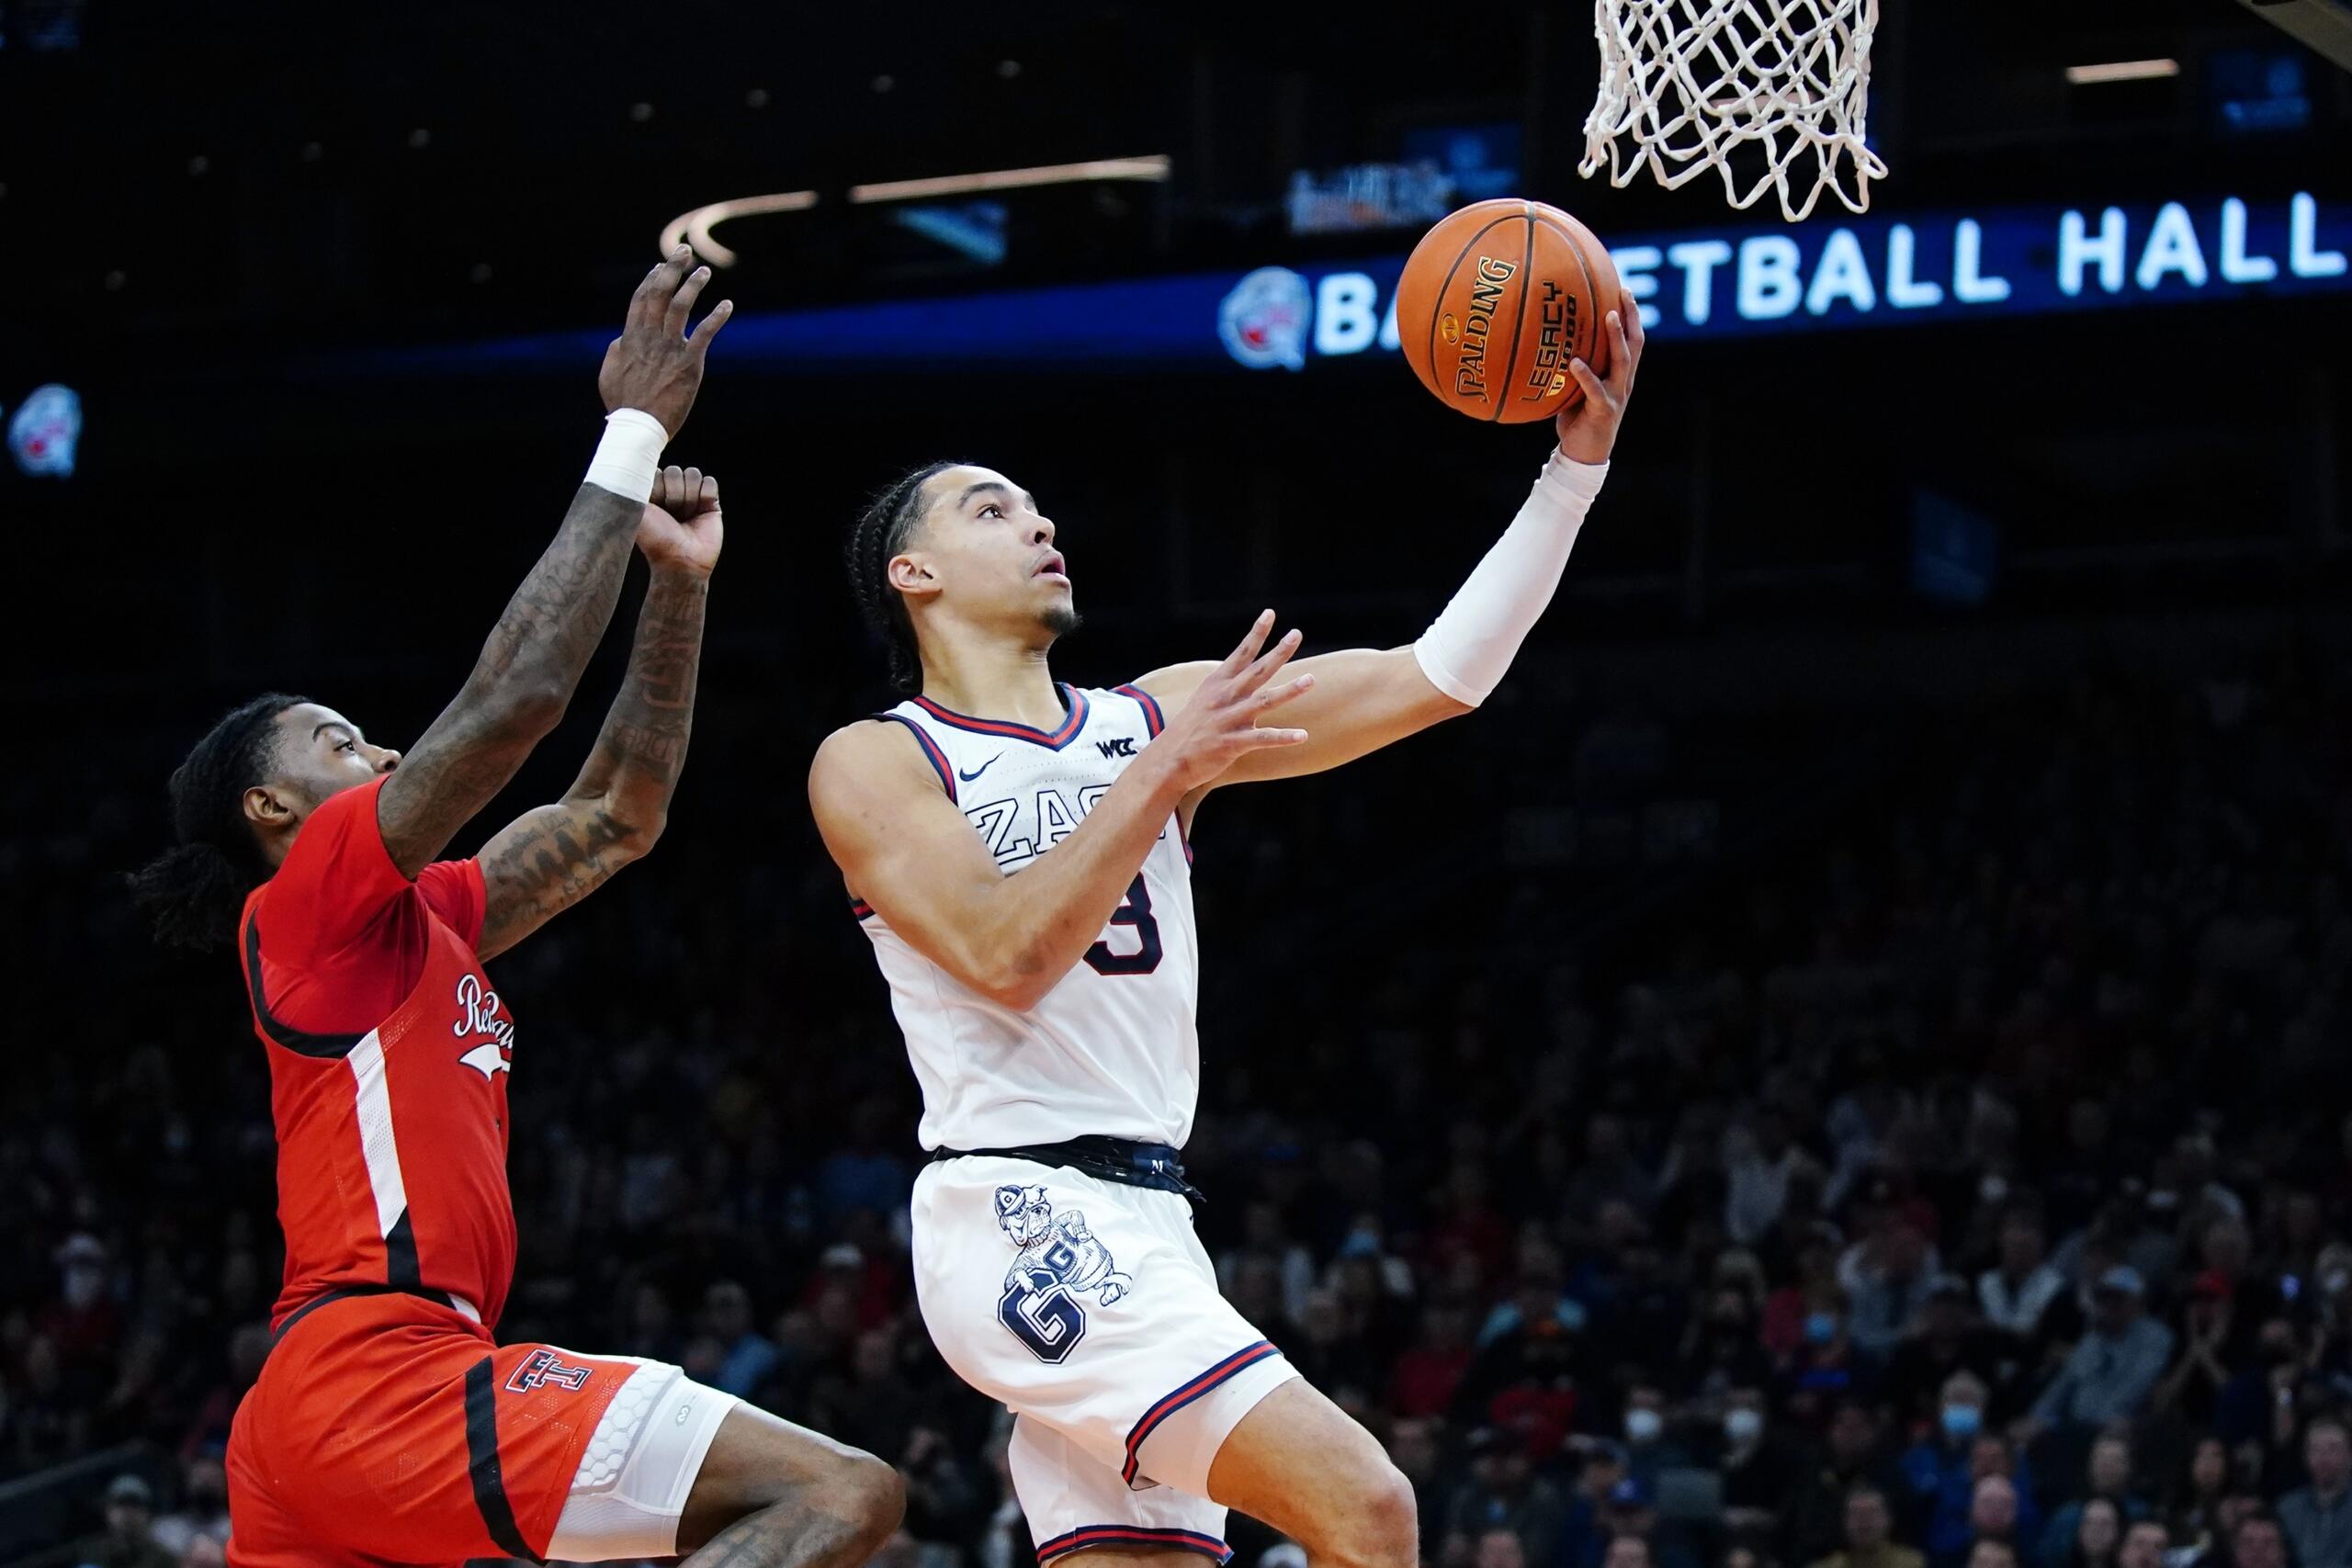 Gonzaga guard Andrew Nembhard, right, goes up for a shot against Texas Tech guard Davion Warren, left, during the first half of an NCAA college basketball game at the Jerry Colangelo Classic Saturday, Dec. 18, 2021, in Phoenix. (AP Photo/Ross D.